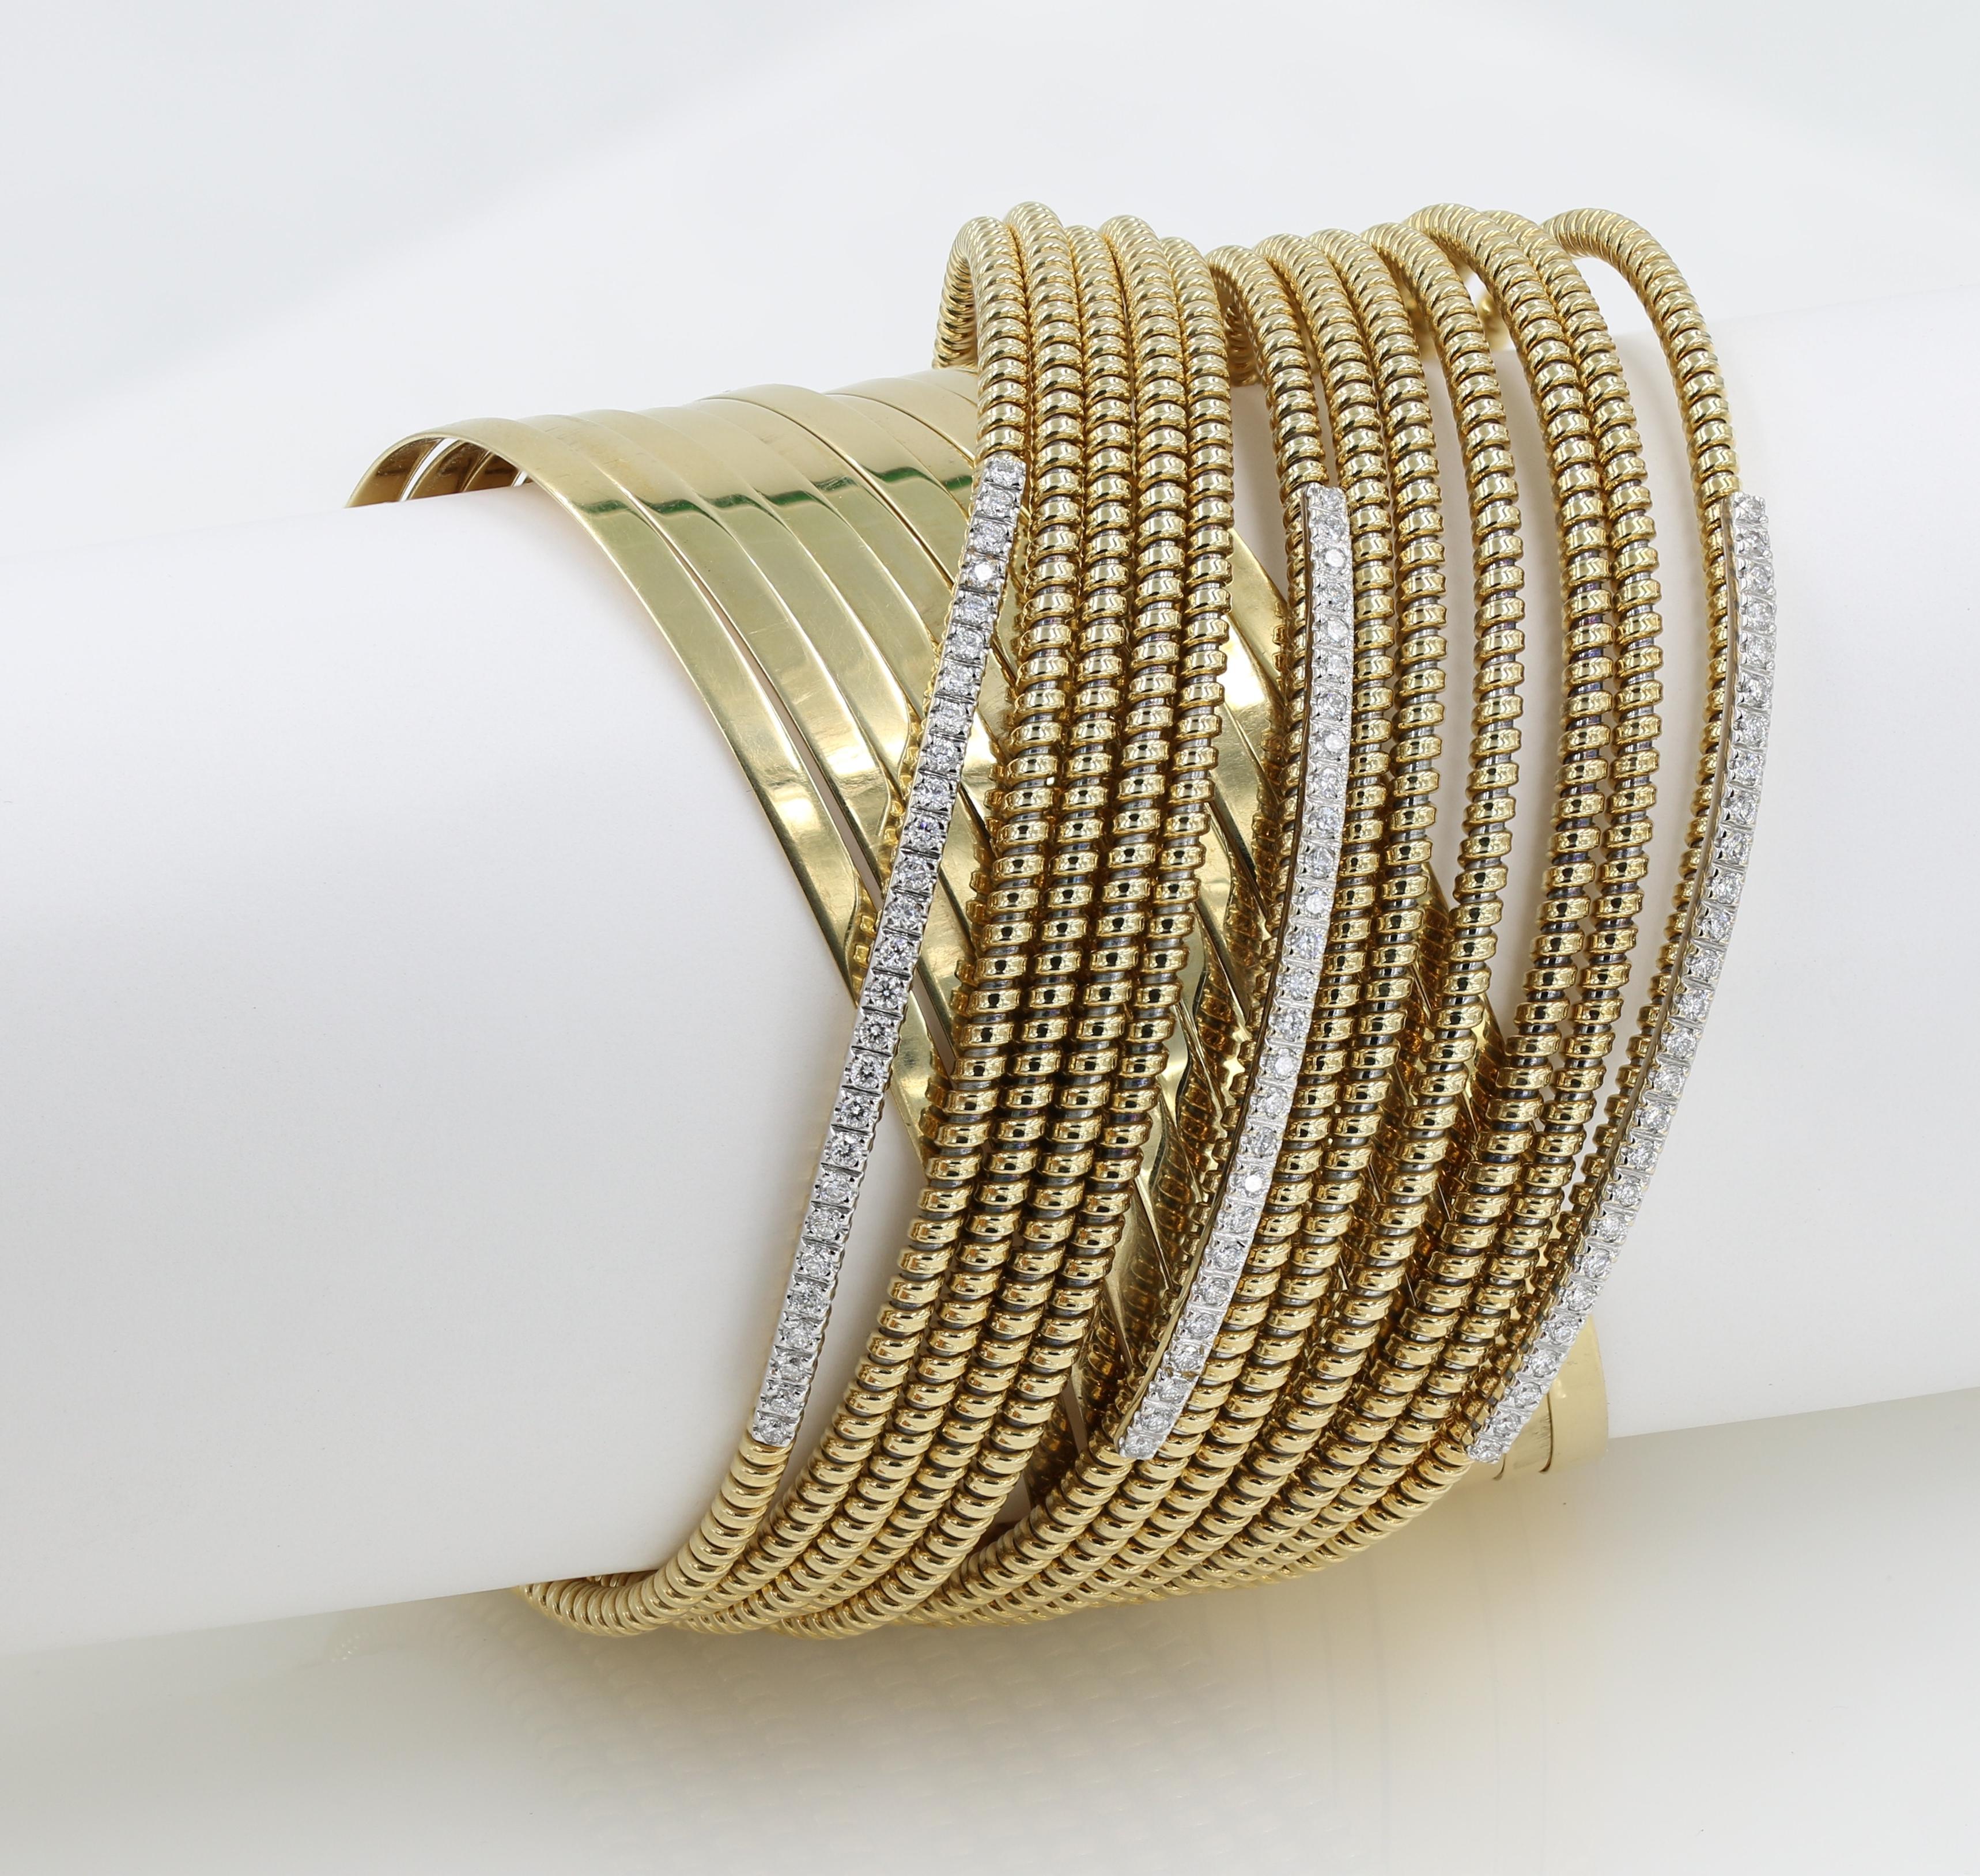 18kt Yellow gold flexible wide bracelet with diamonds, features 81 Natural round cut diamonds (GH - VS) weighing 1.21cts total. Bracelet weighs over 63 DWT. 